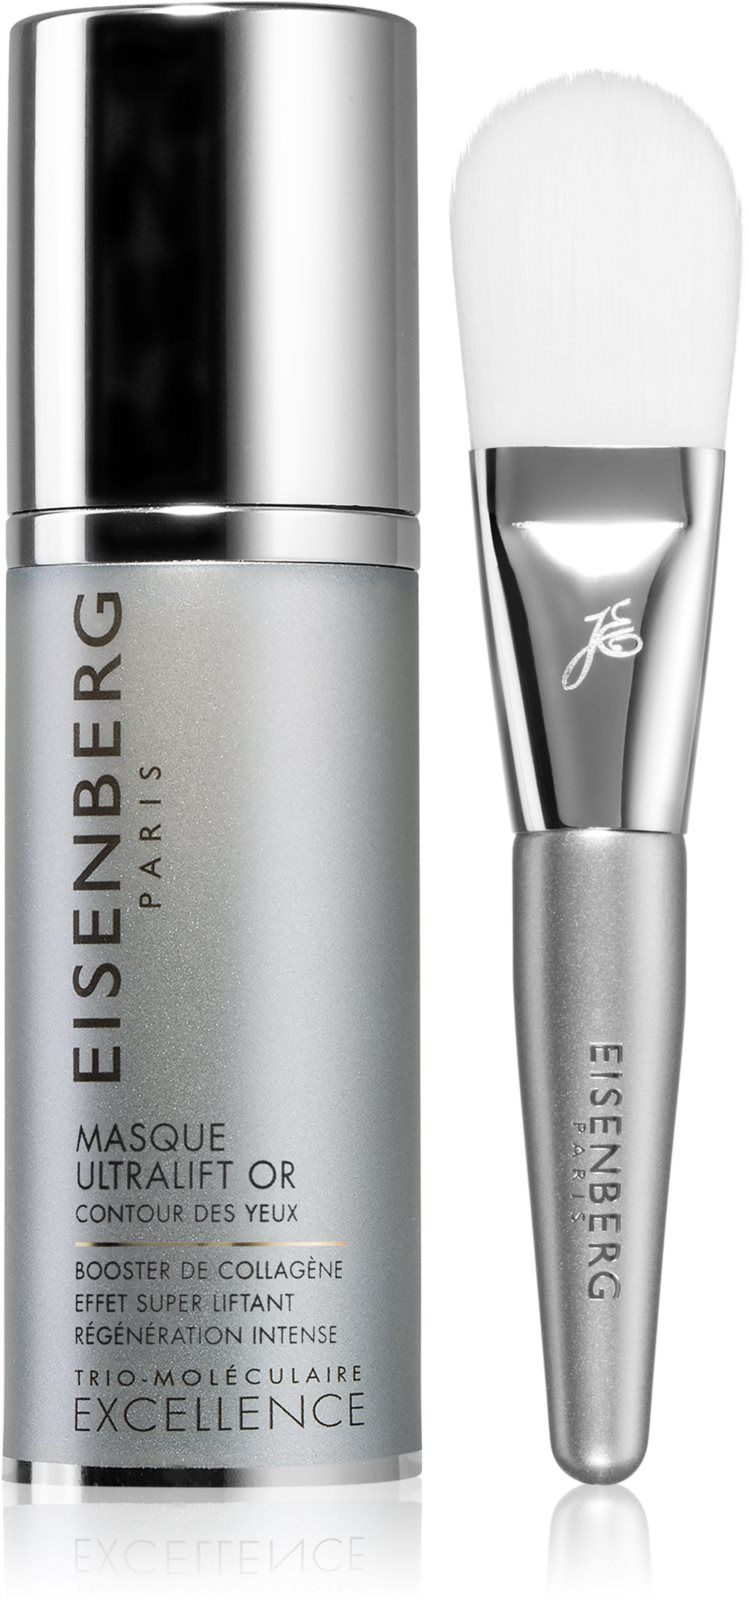 Excellence Masque Ultralift Or - Excellence - EISENBERG Paris